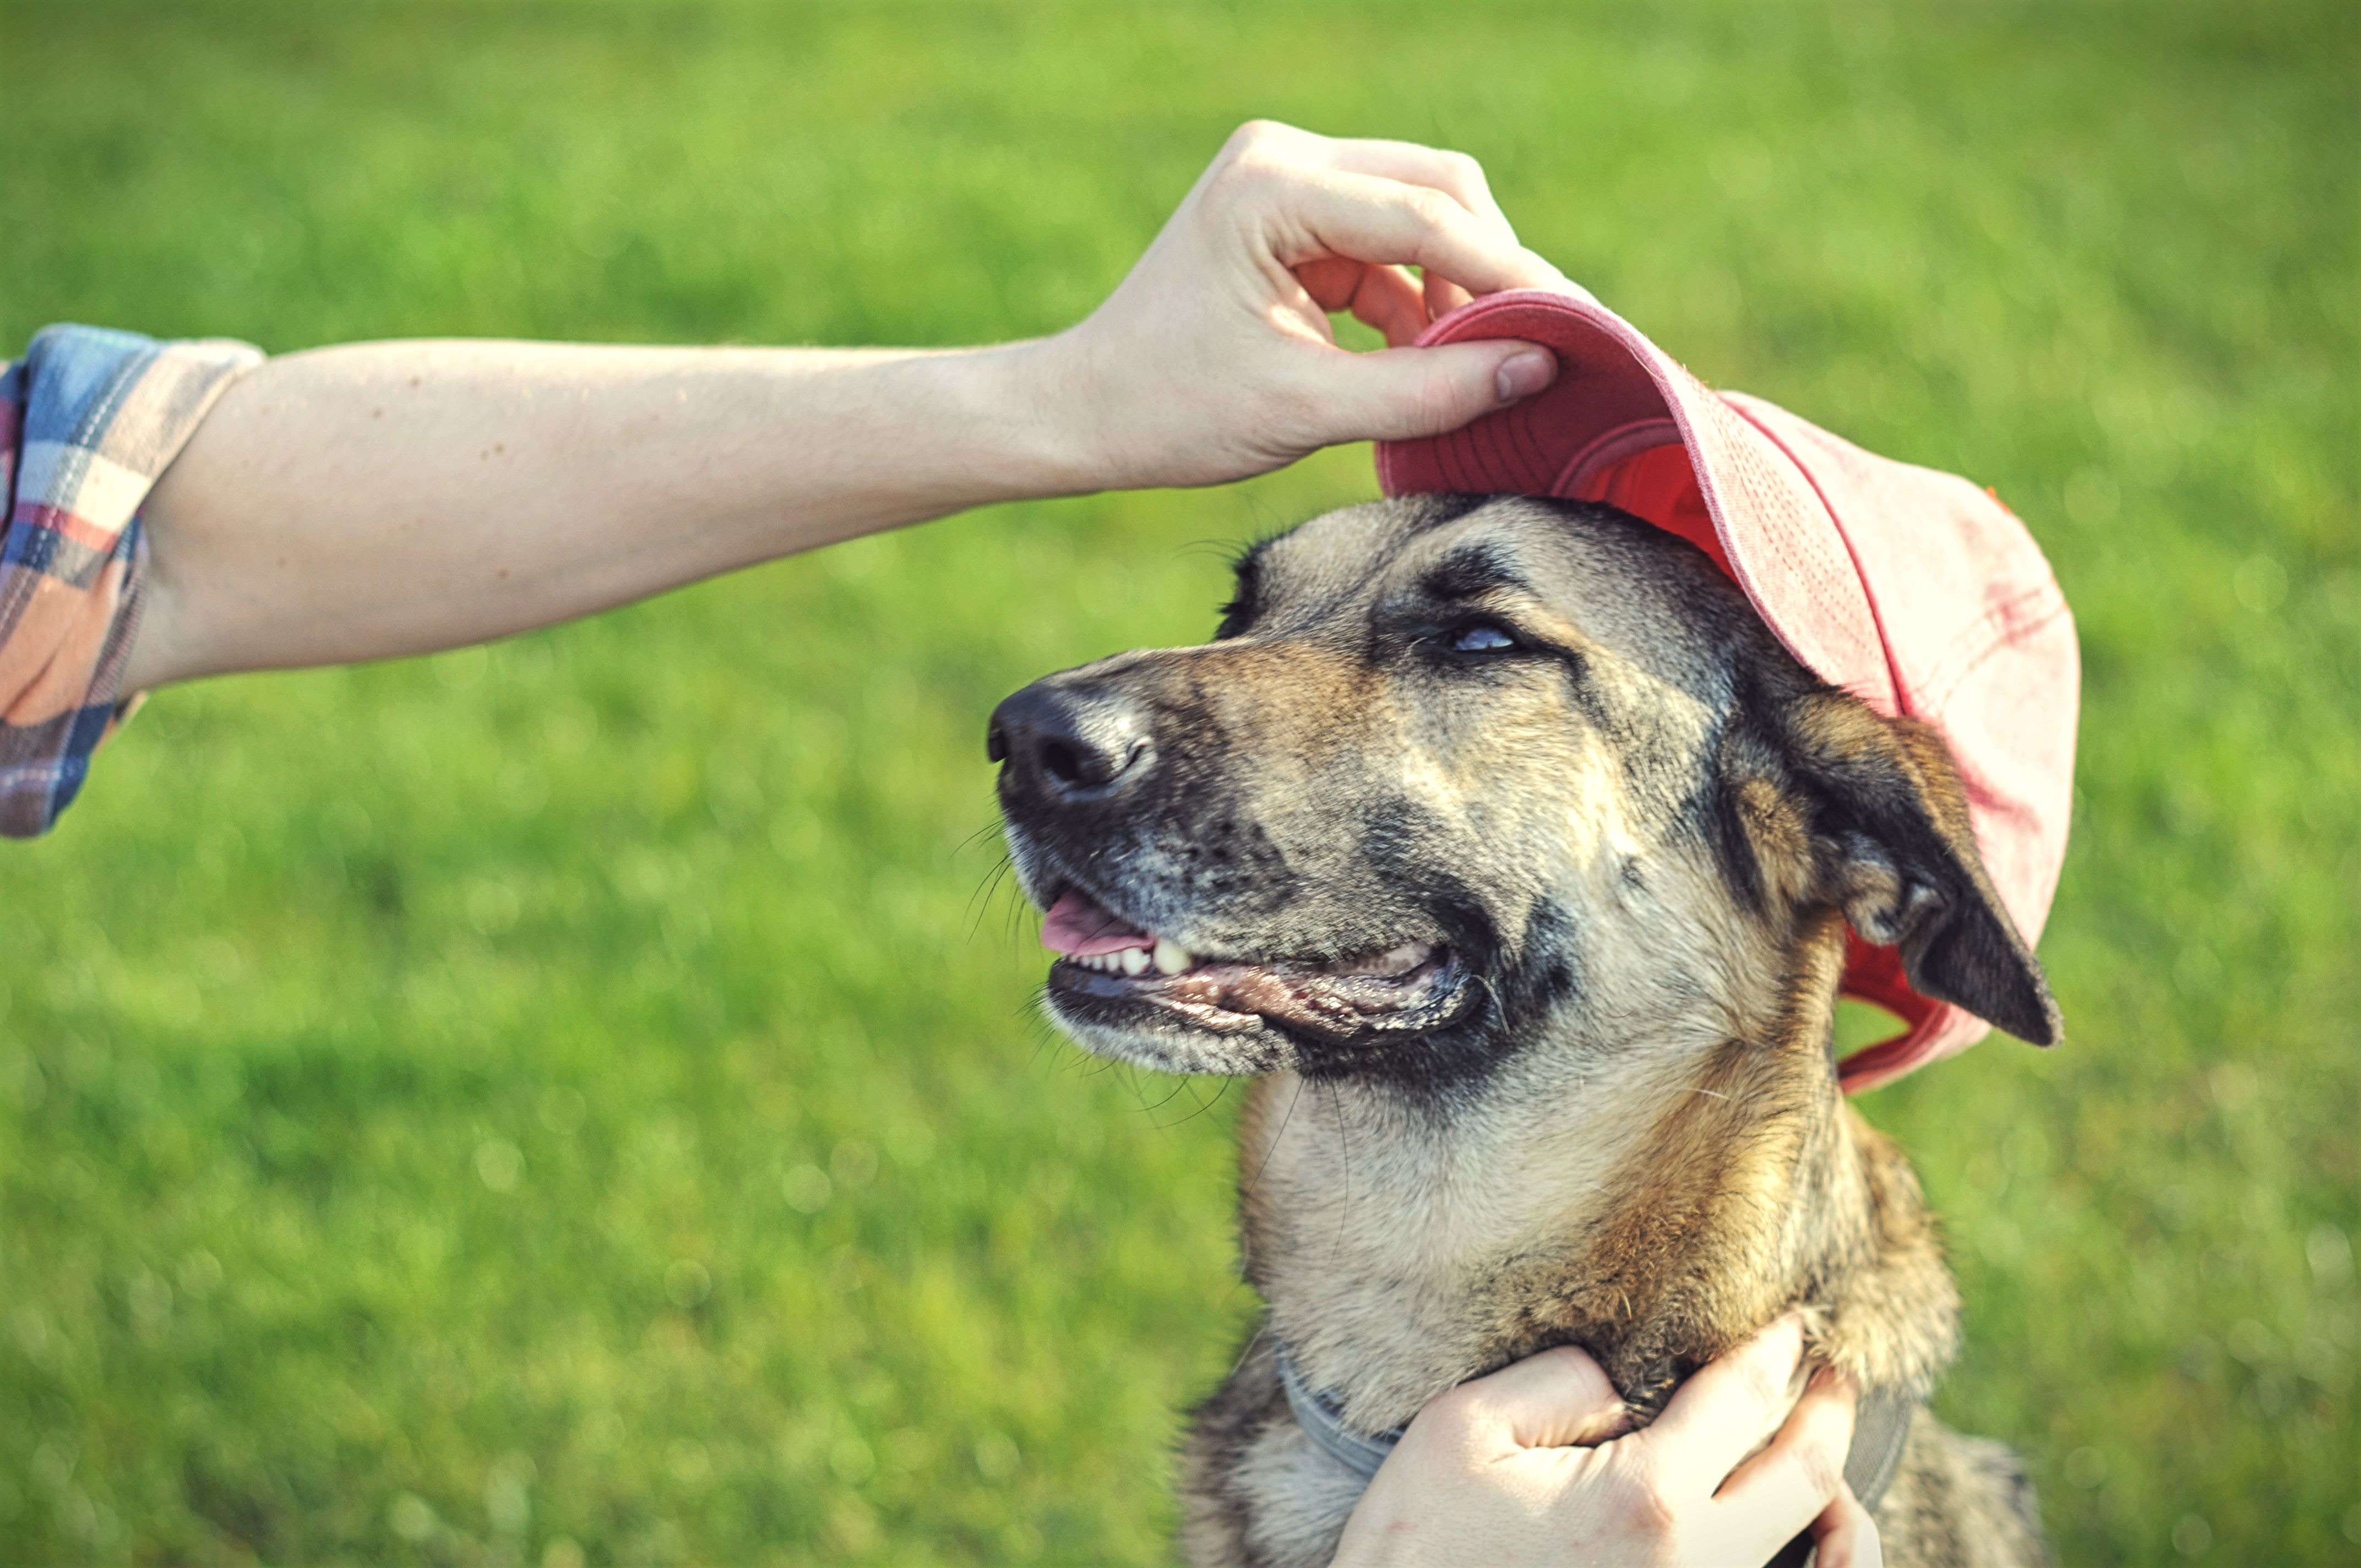 Dog accounts, like any social media accounts, should cater their content to their audience, even if that means sillier photos, such as this dog in a baseball hat.